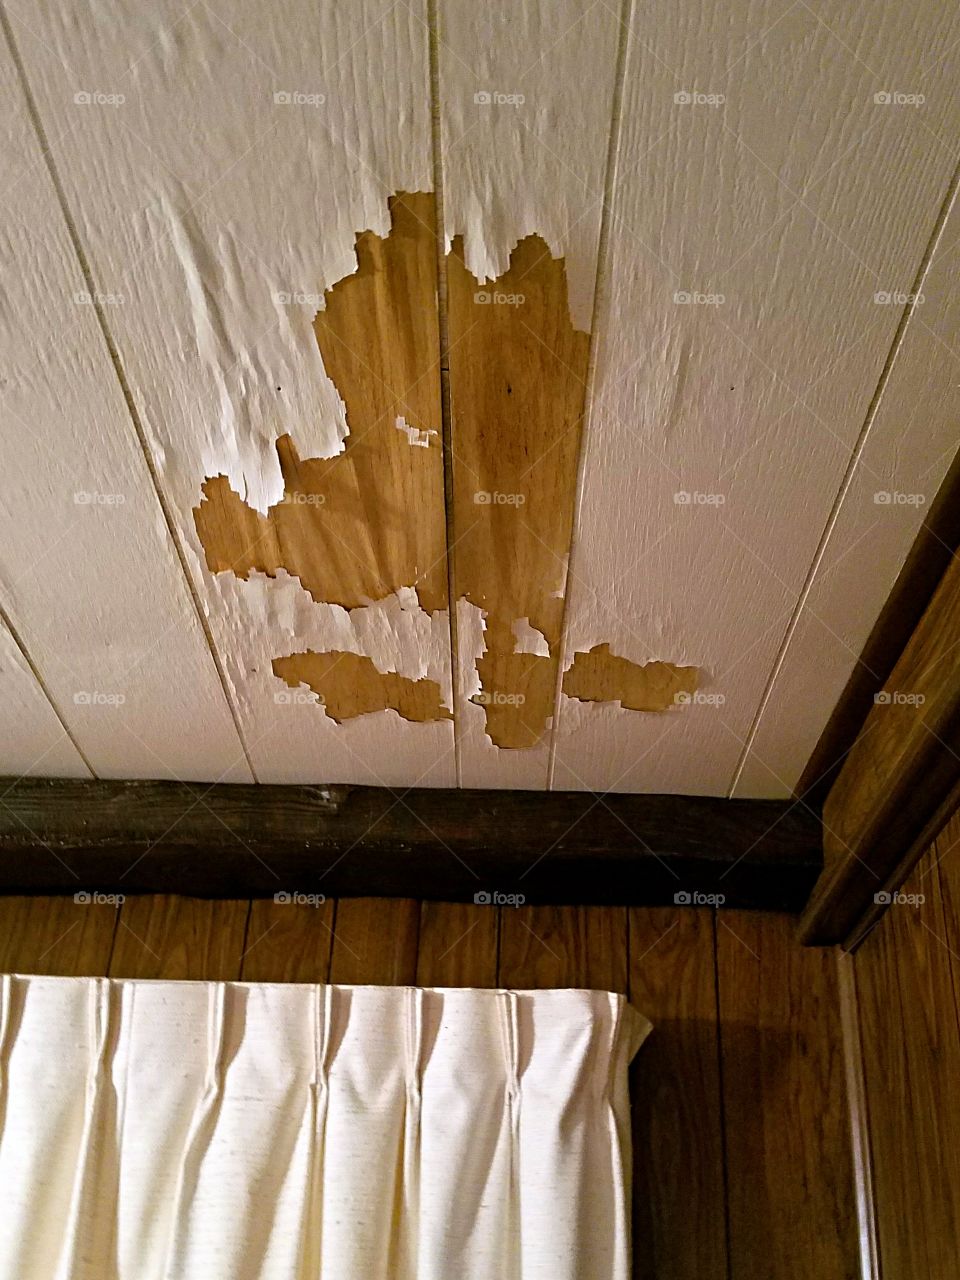 Water damage and peeling paint!